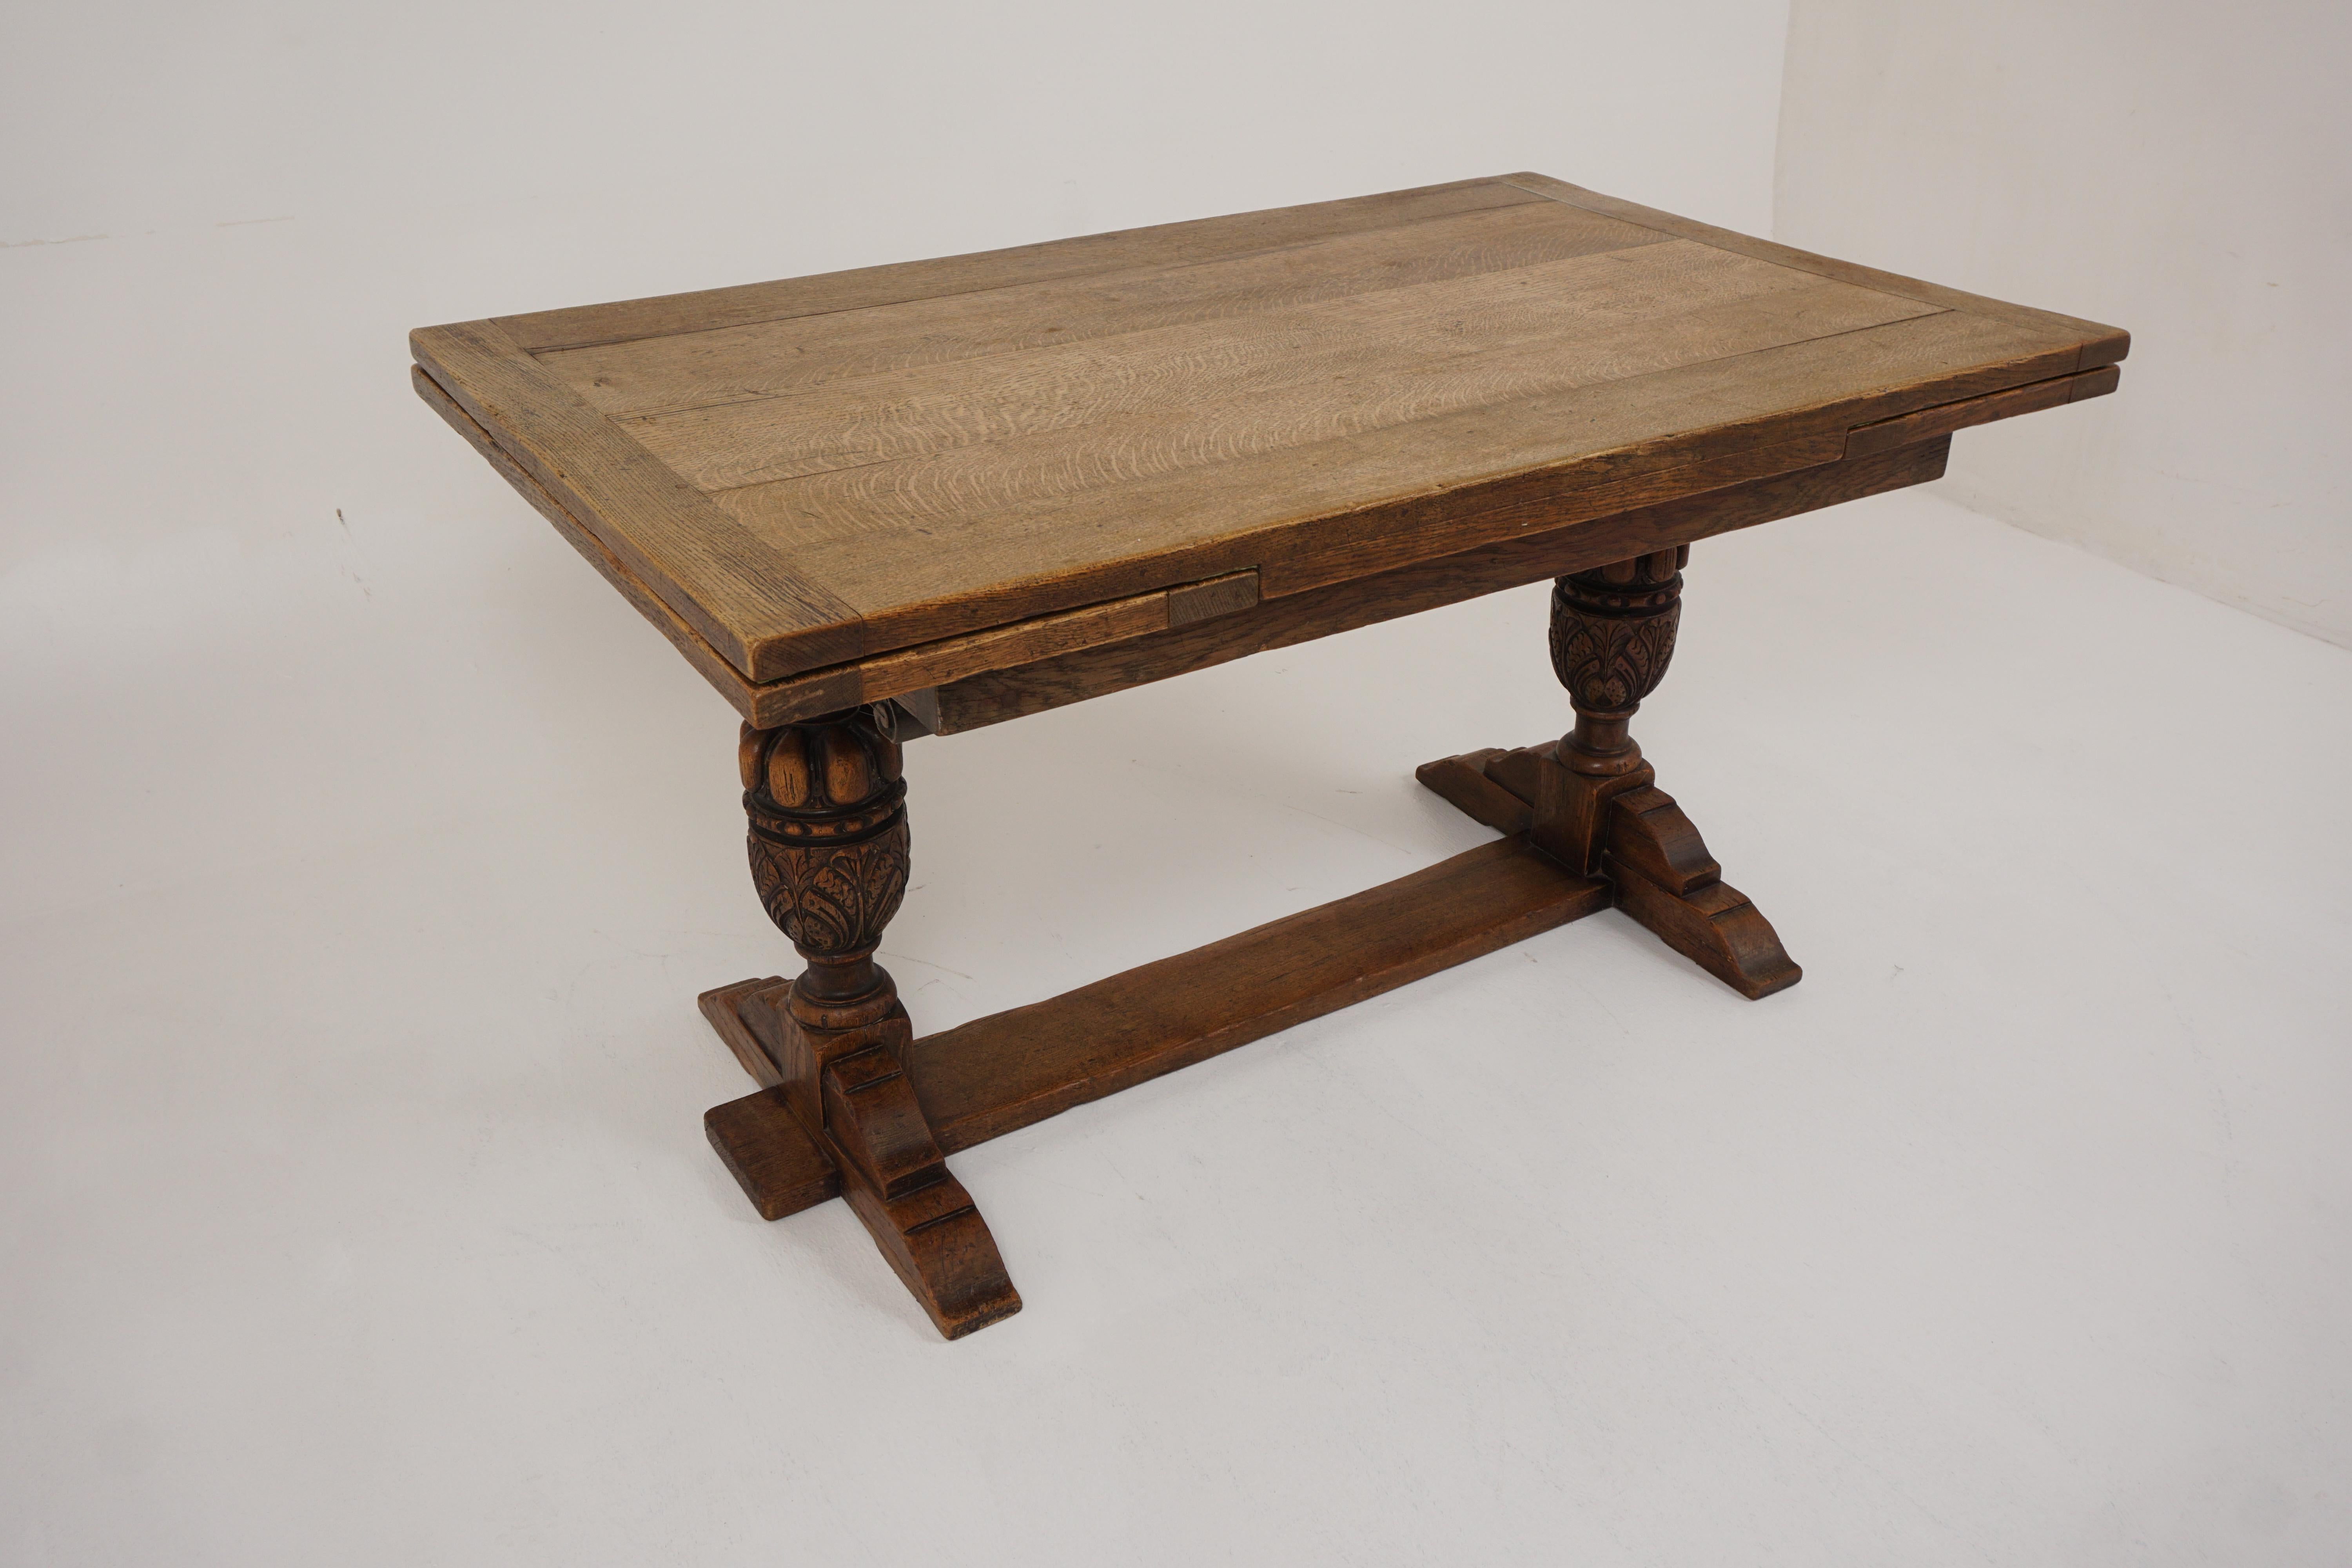 Antique oak refectory dining table with leaves, Farmhouse table, Scotland 1910, B2592

Scotland 1910
Solid Oak
Original finish
The refectory table with rectangular top having pull out ends
Above carve bulbous cup and cover supports
United by